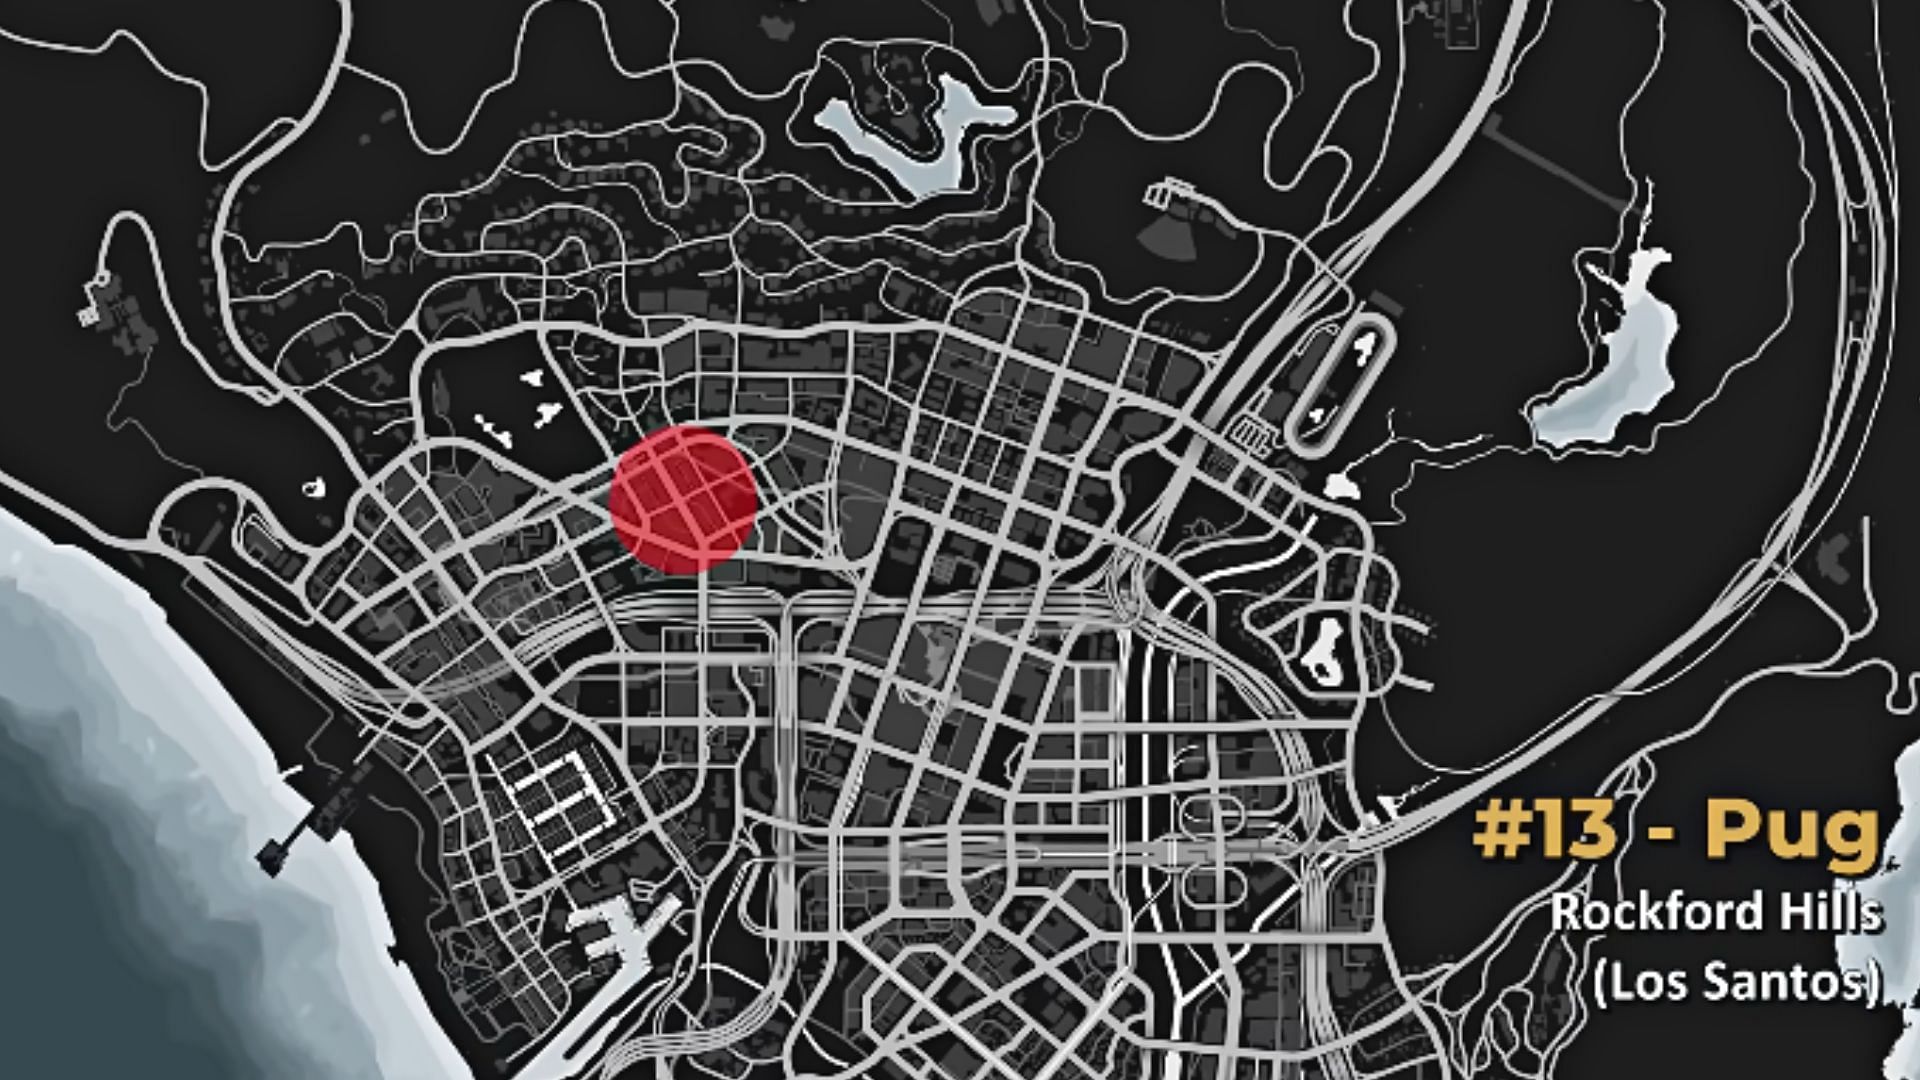 Look for the Pug in the area within the red circle (Image via YouTube/GTA Series Videos)